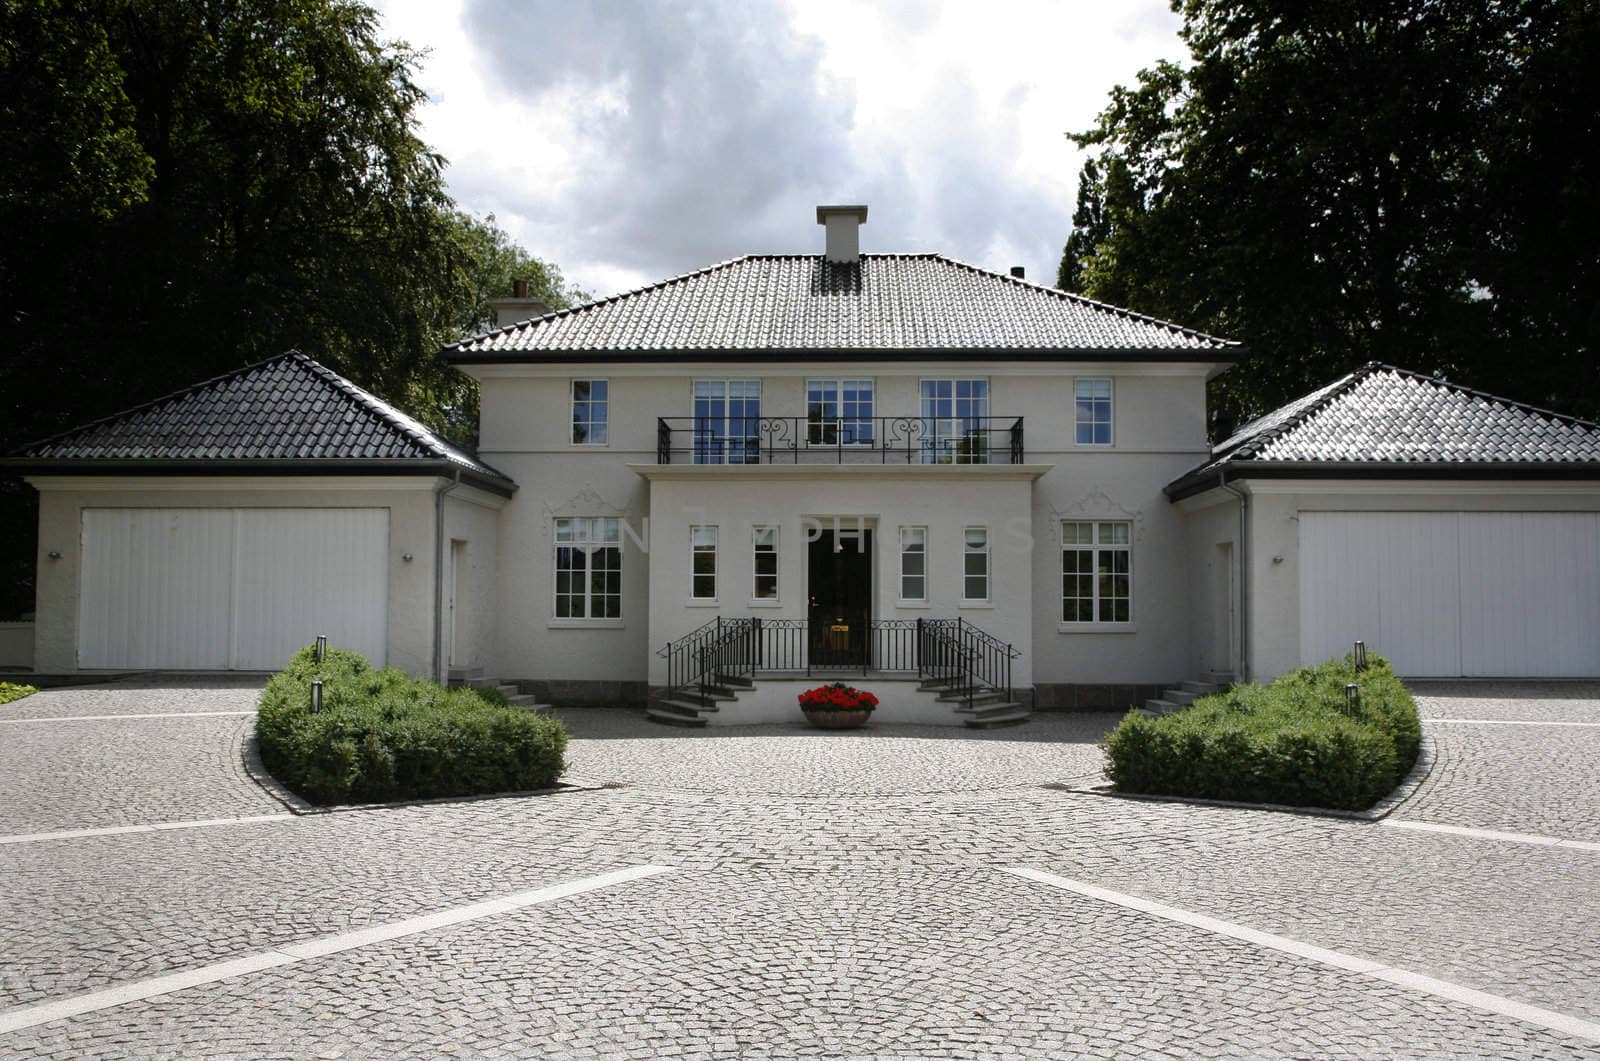 Old renovated upper class villa and nice driveway Denmark.